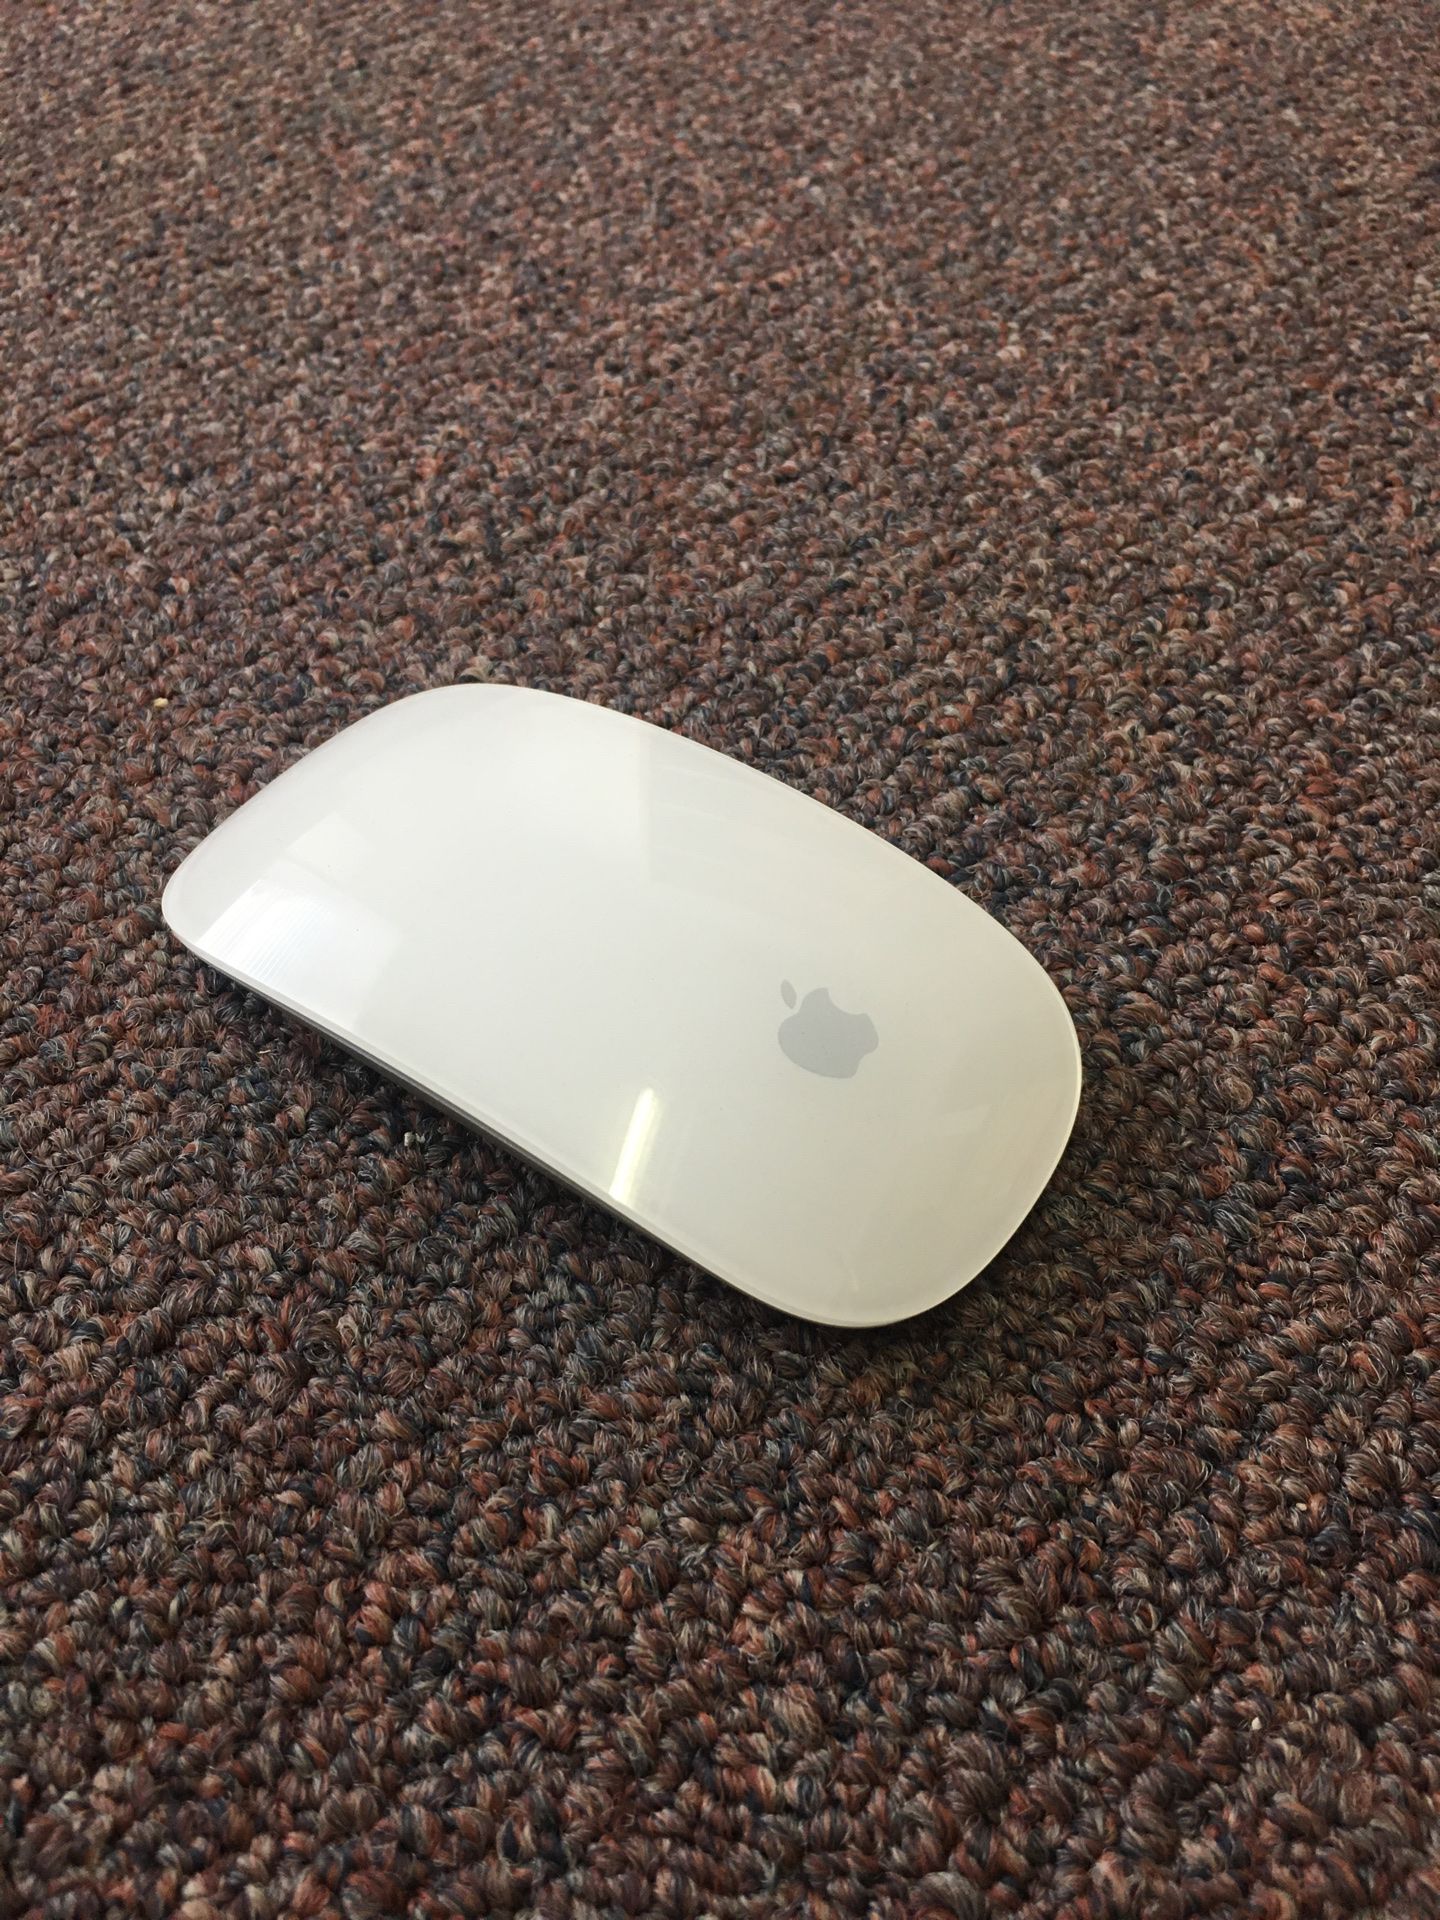 Wireless apple mouse